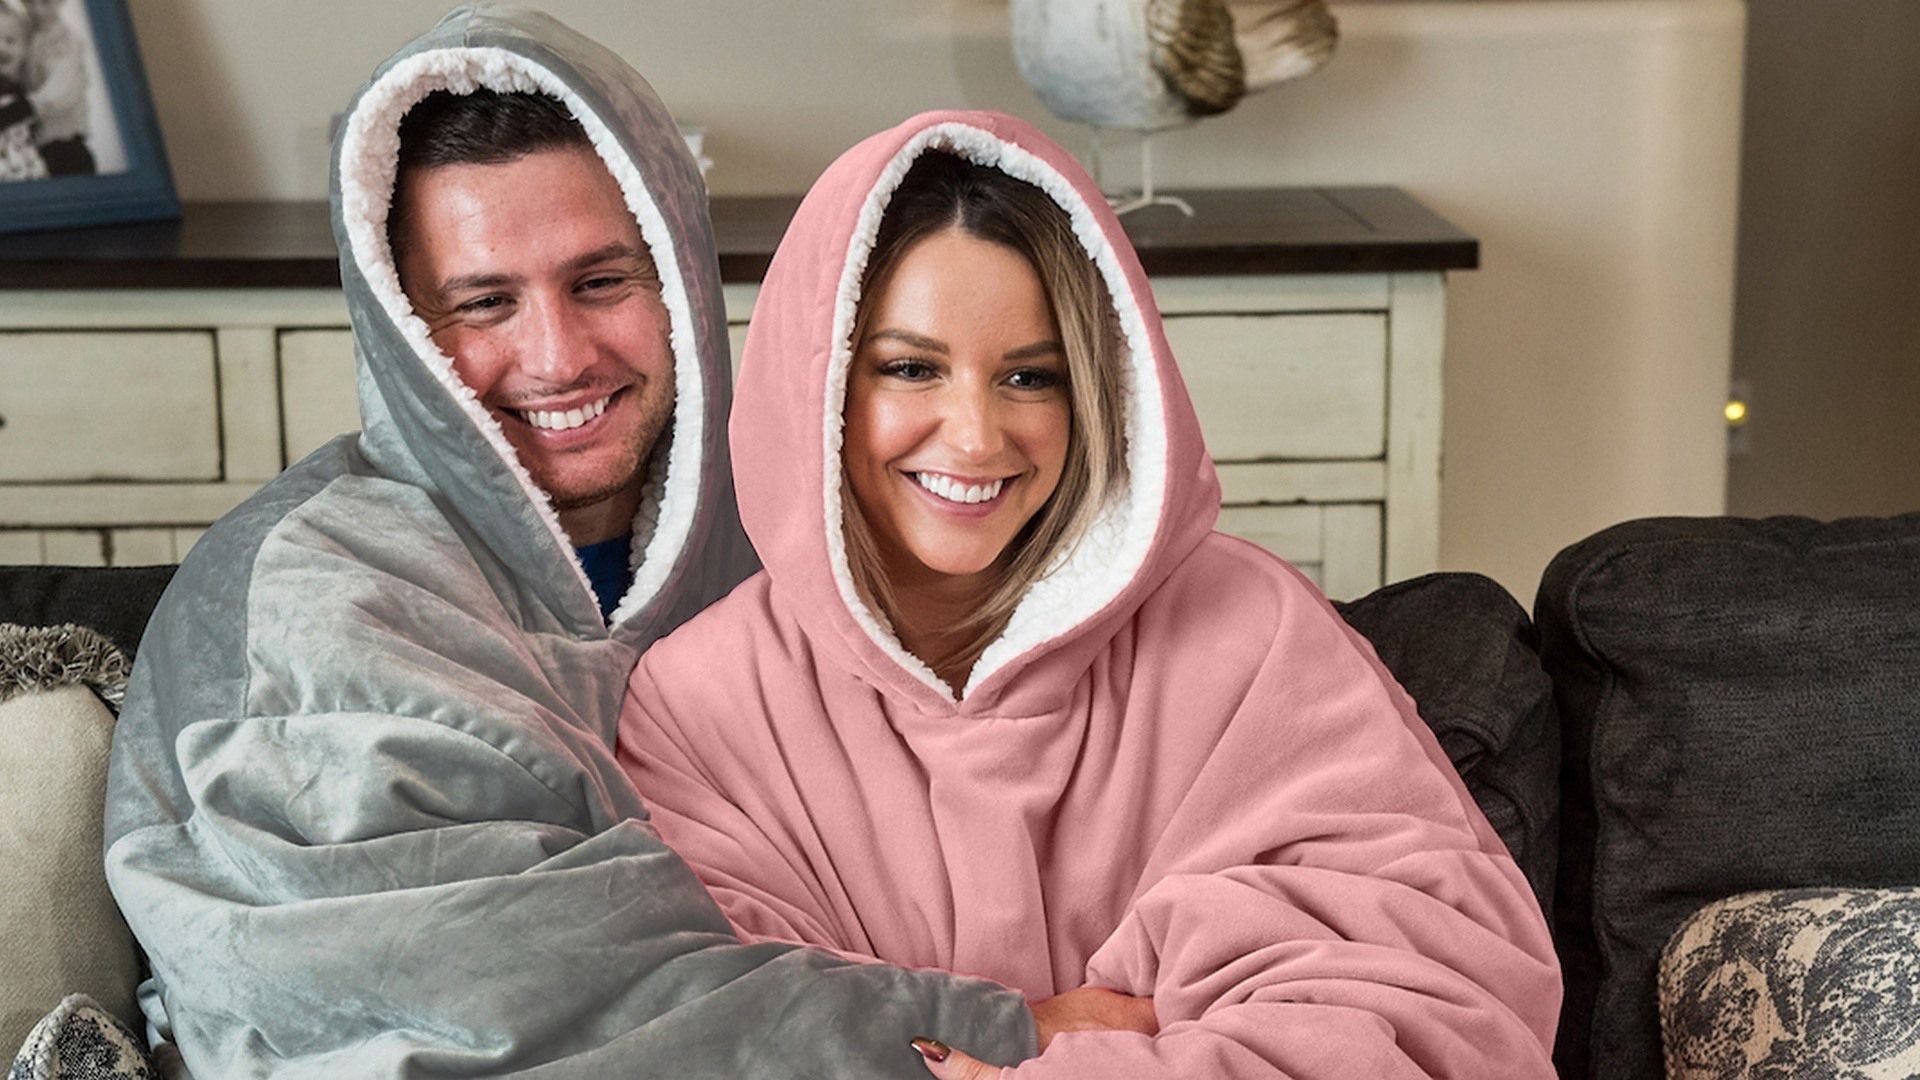 20 Best Cozy Gifts 2022 - Comfortable Gift Ideas